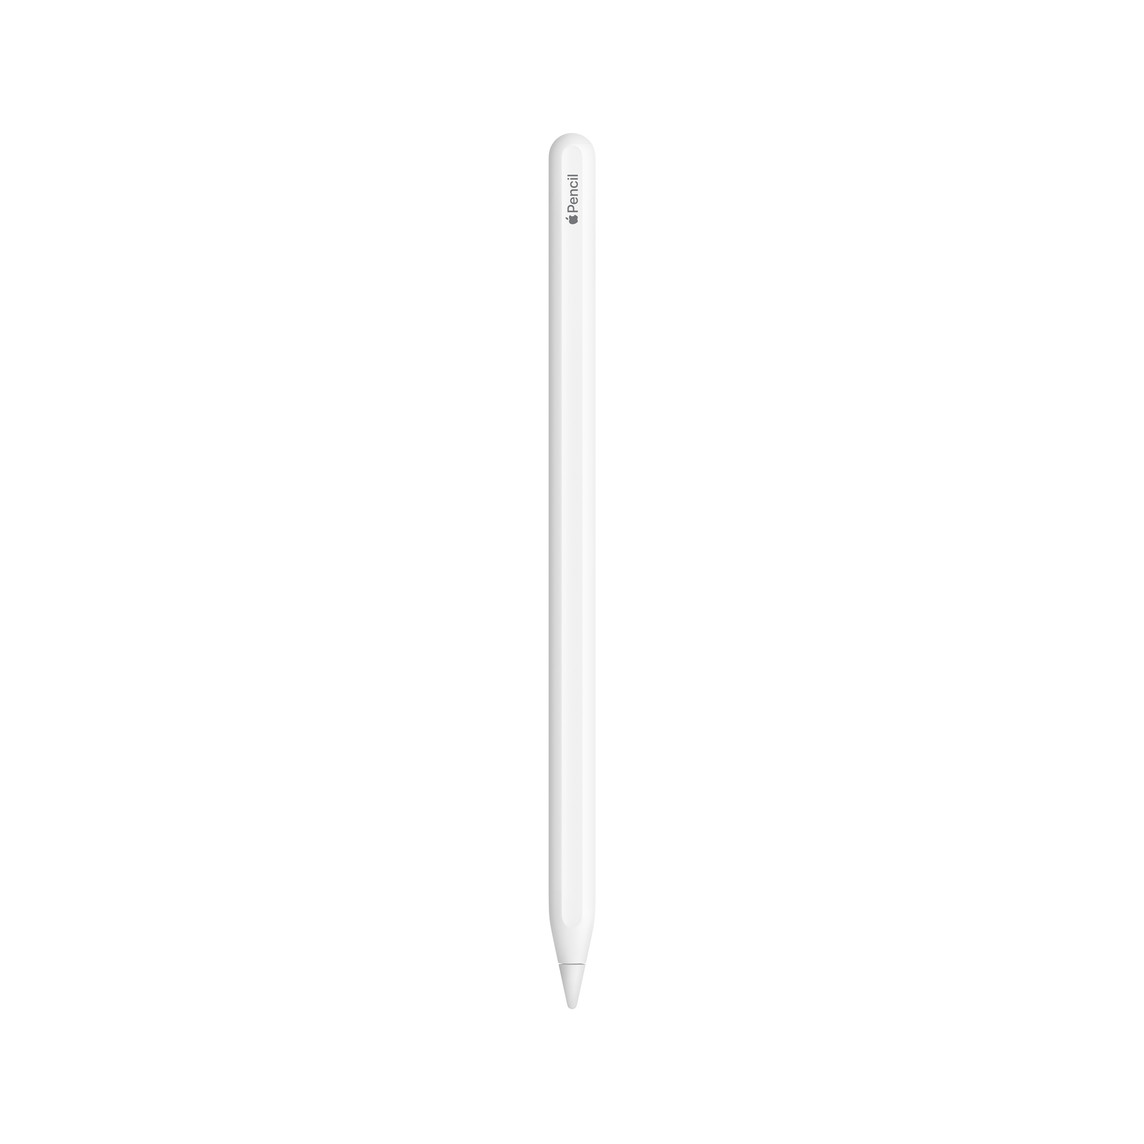 Apple Pencil (2nd Generation) featuring its flat edge that attaches magnetically for automatic charging and pairing.